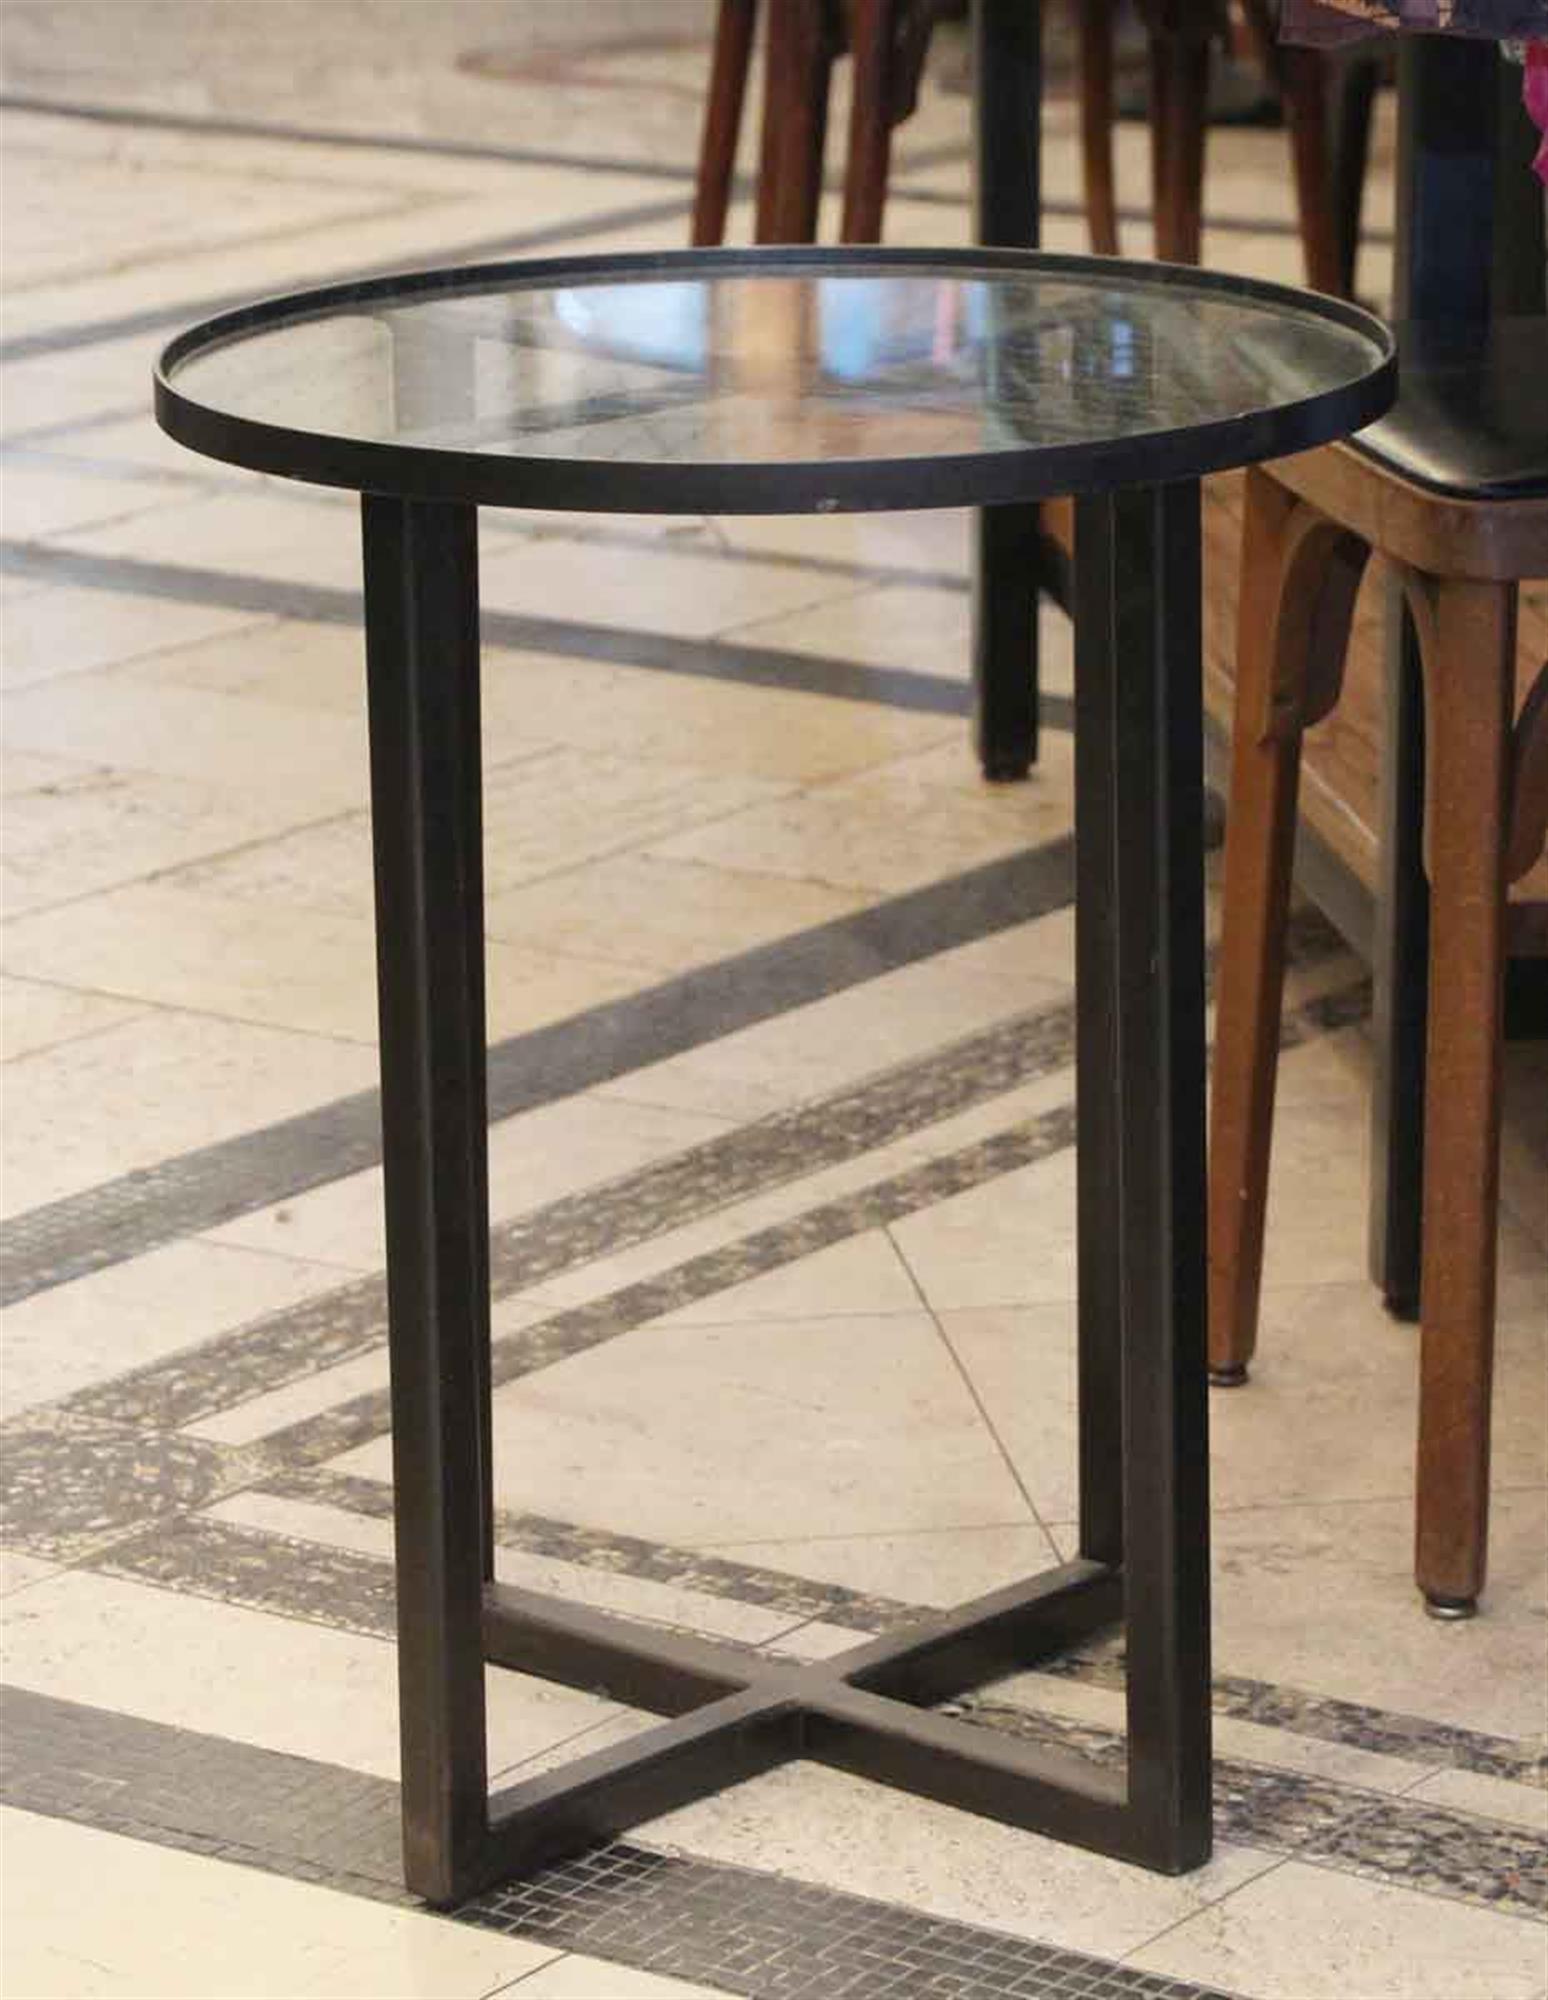 Round top chicken wire glass table with a black finished steel frame. Done in a Mid-Century Modern / Industrial style. Small quantity available at time of posting. Custom sizes available. This can be seen at our 5 East 16th St location on Union